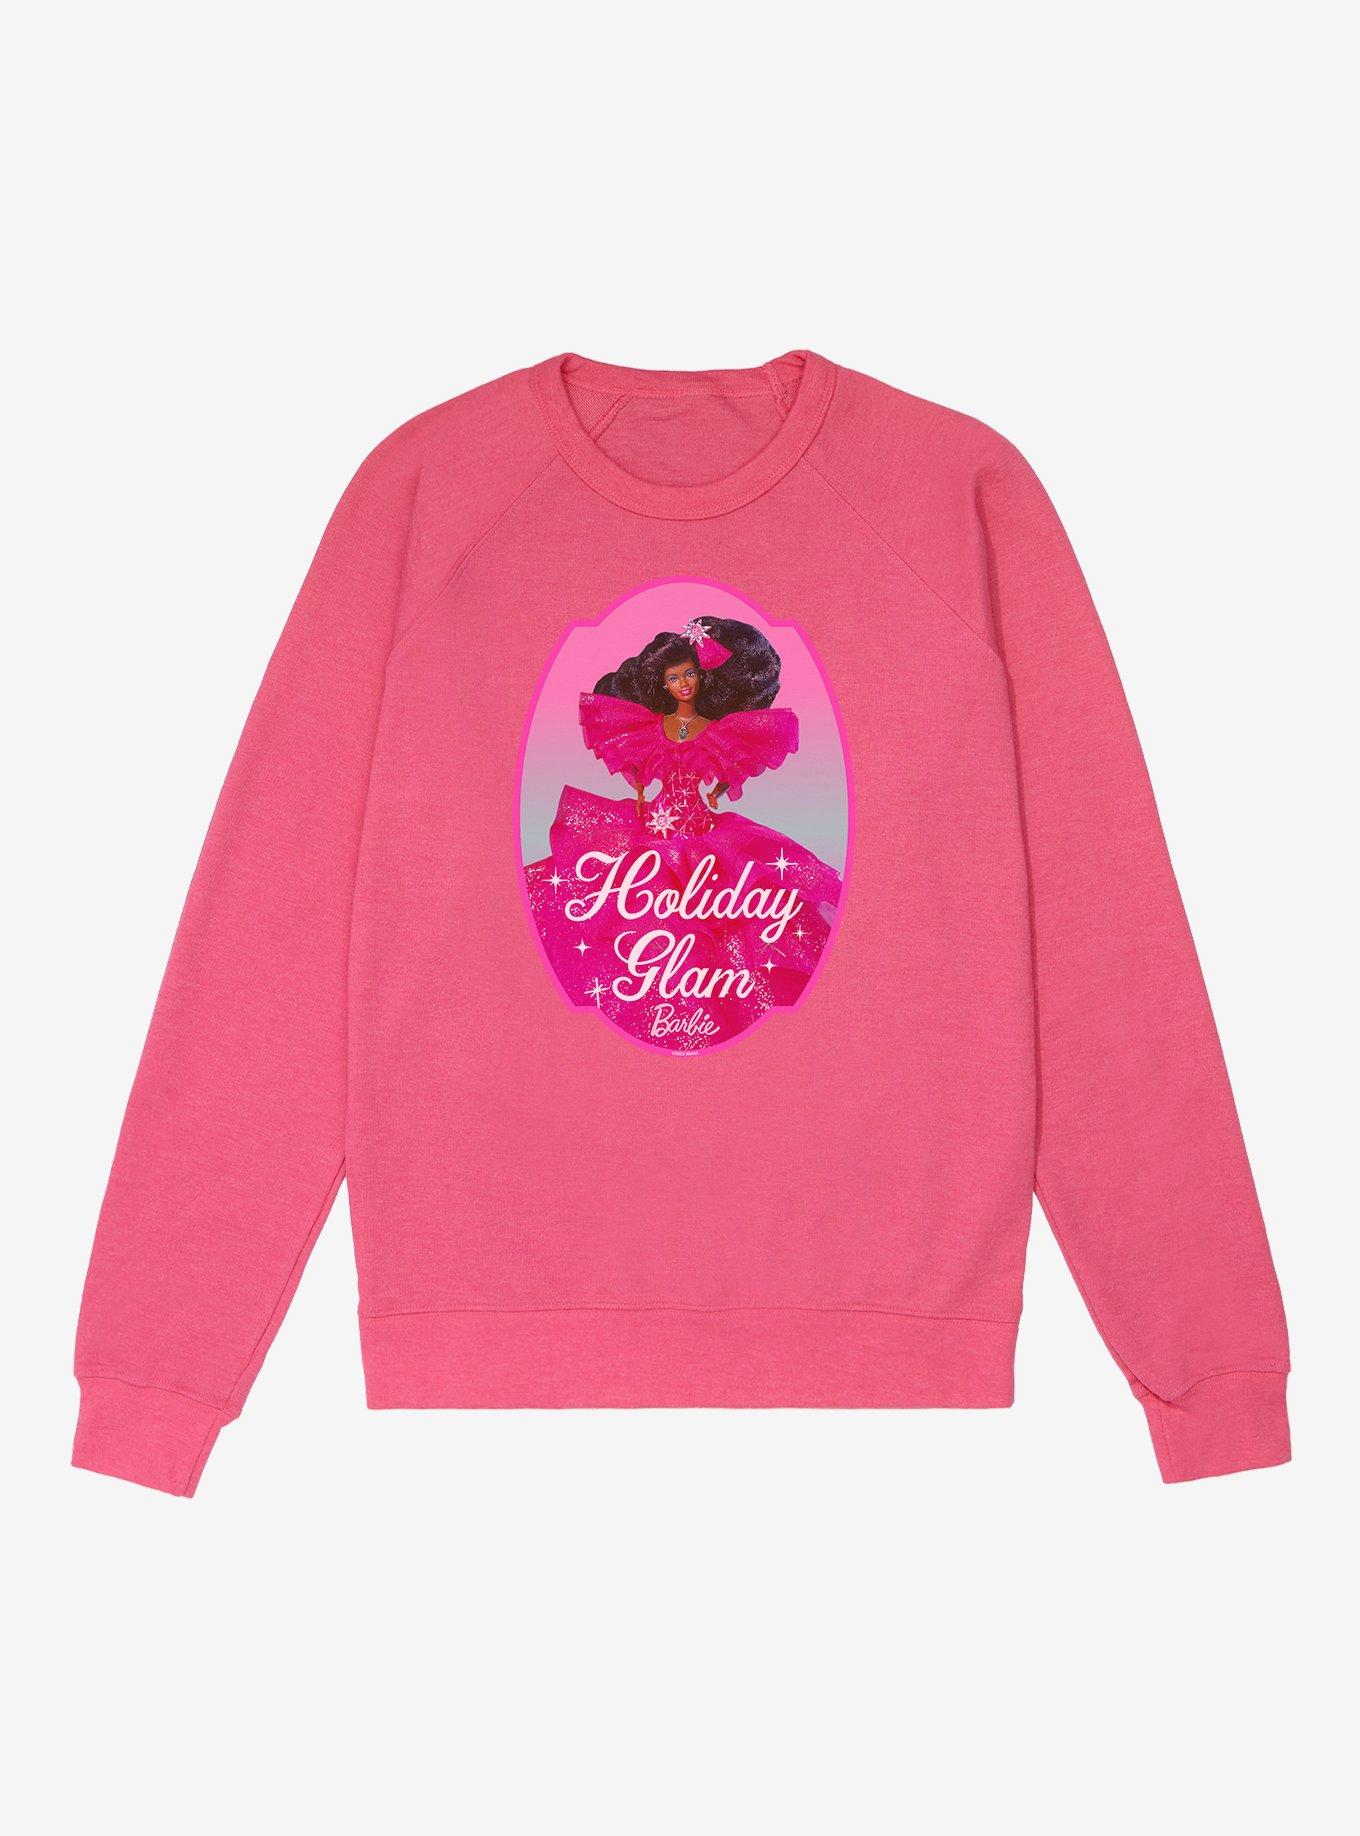 Barbie Holiday Glam French Terry Sweatshirt